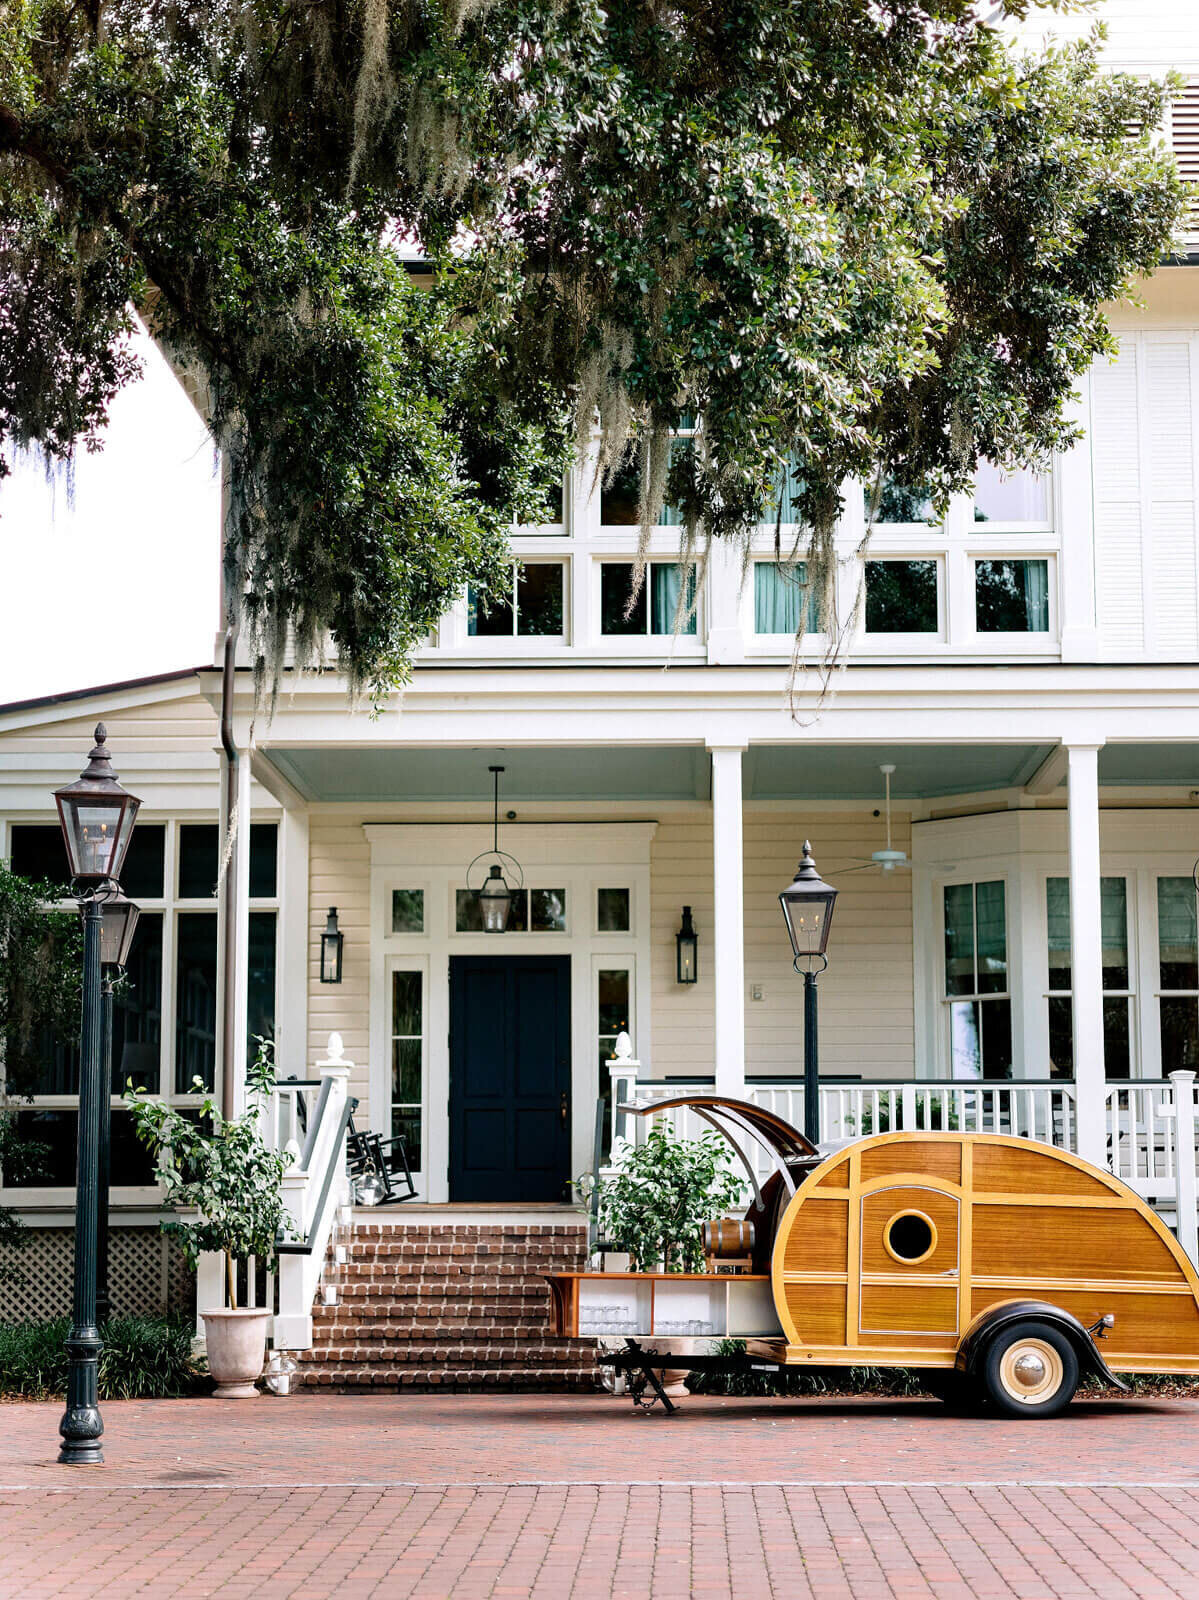 A cute wooden cart with wheels in front of a pretty house in Montage at Palmetto Bluff. Destination wedding image by Jenny Fu Studio